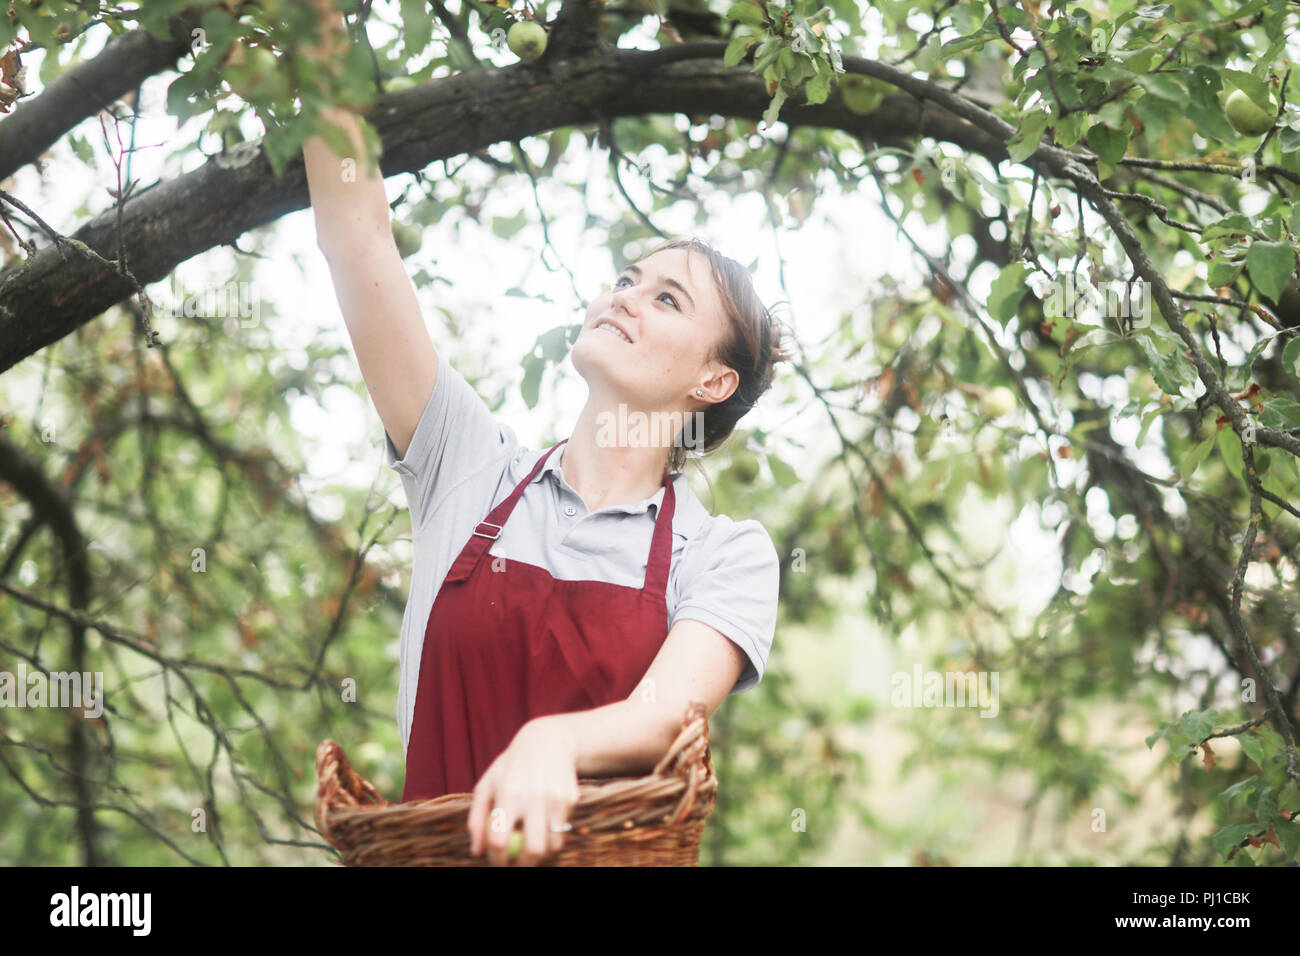 Smiling woman standing in garden picking apples, Germany Stock Photo